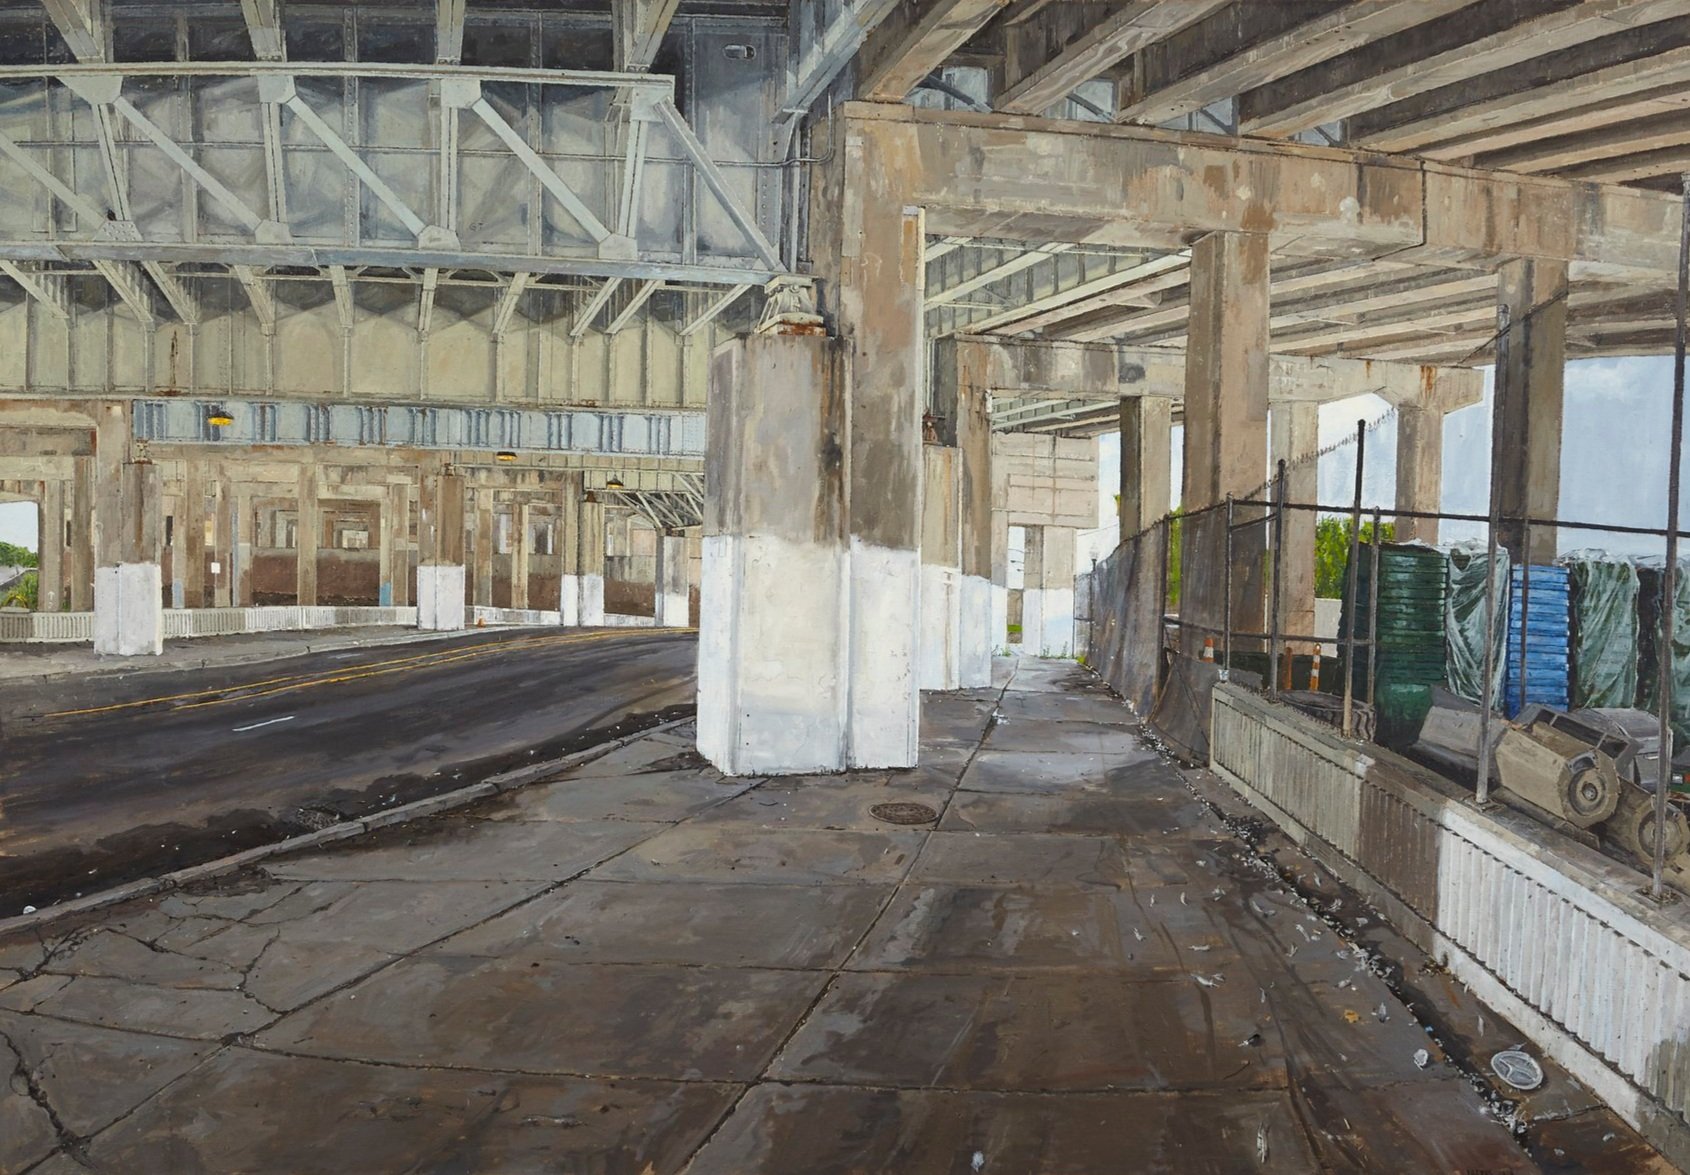 UNDER THE KENNEDY, OIL ON LINEN 34" x 49”